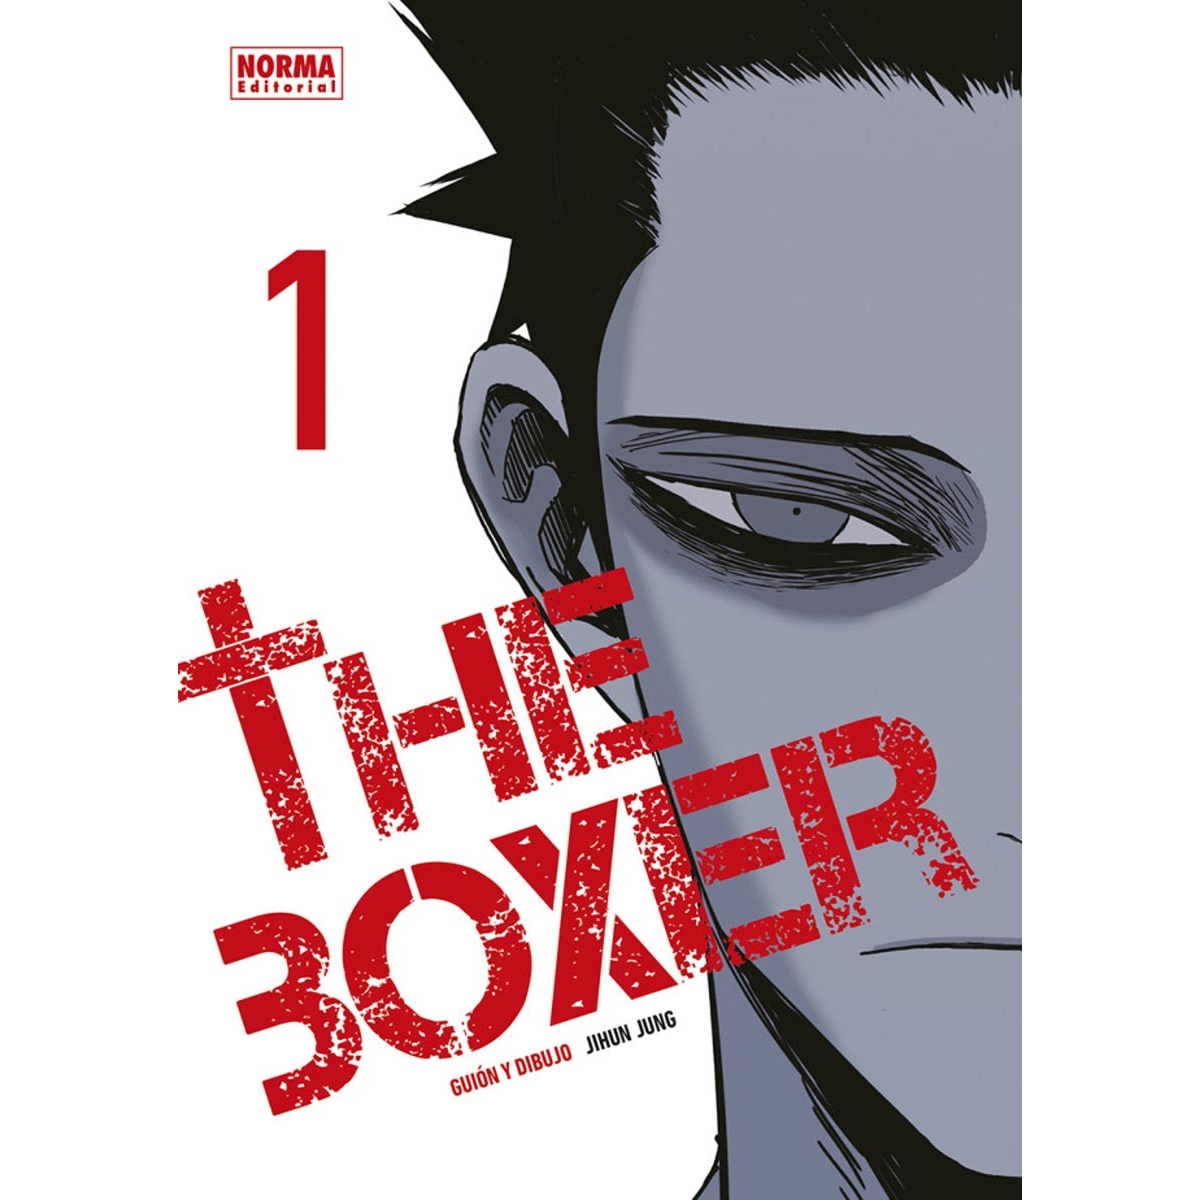 The Boxer 01